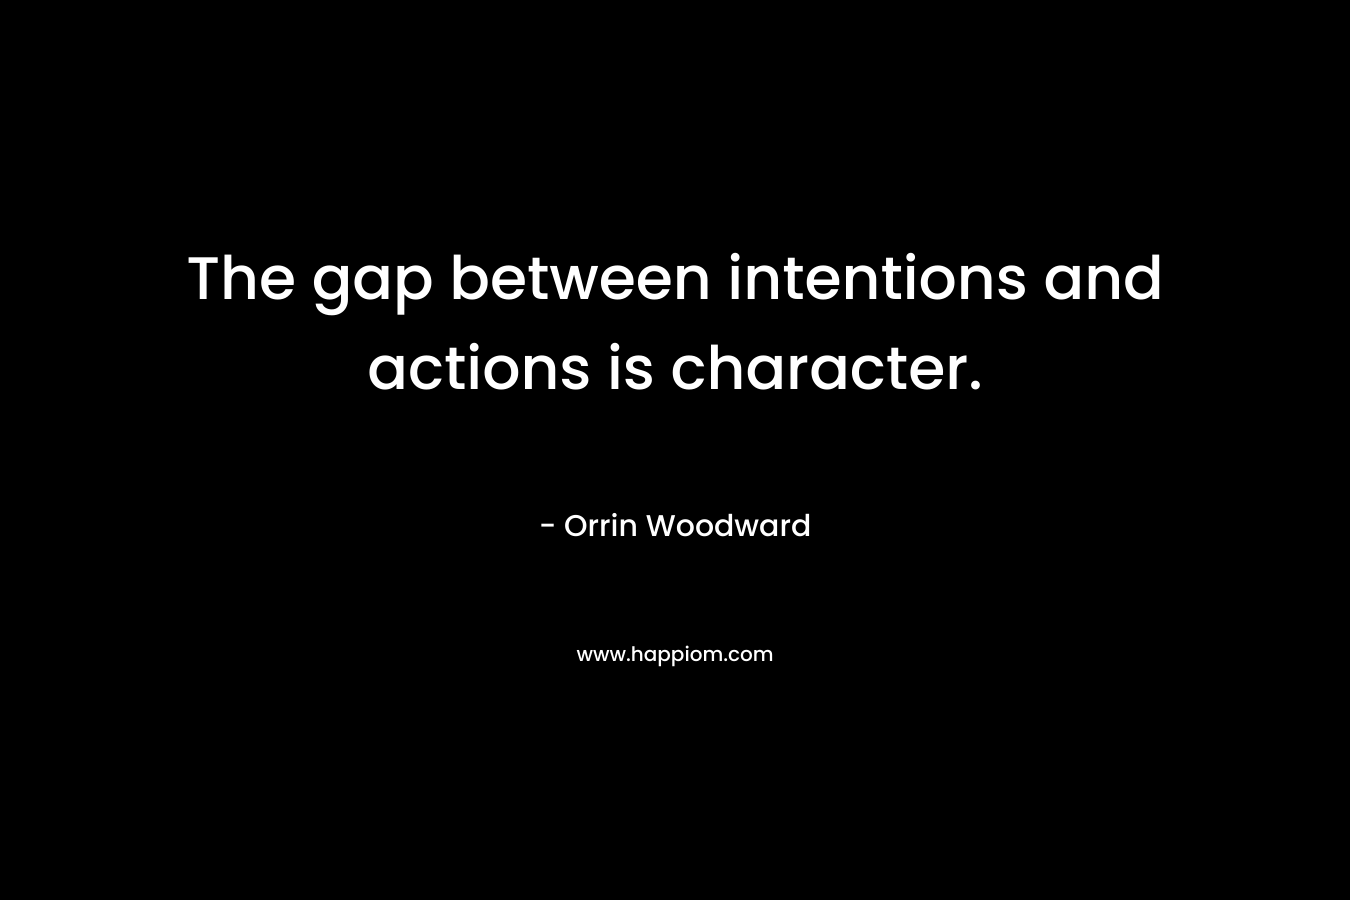 The gap between intentions and actions is character.